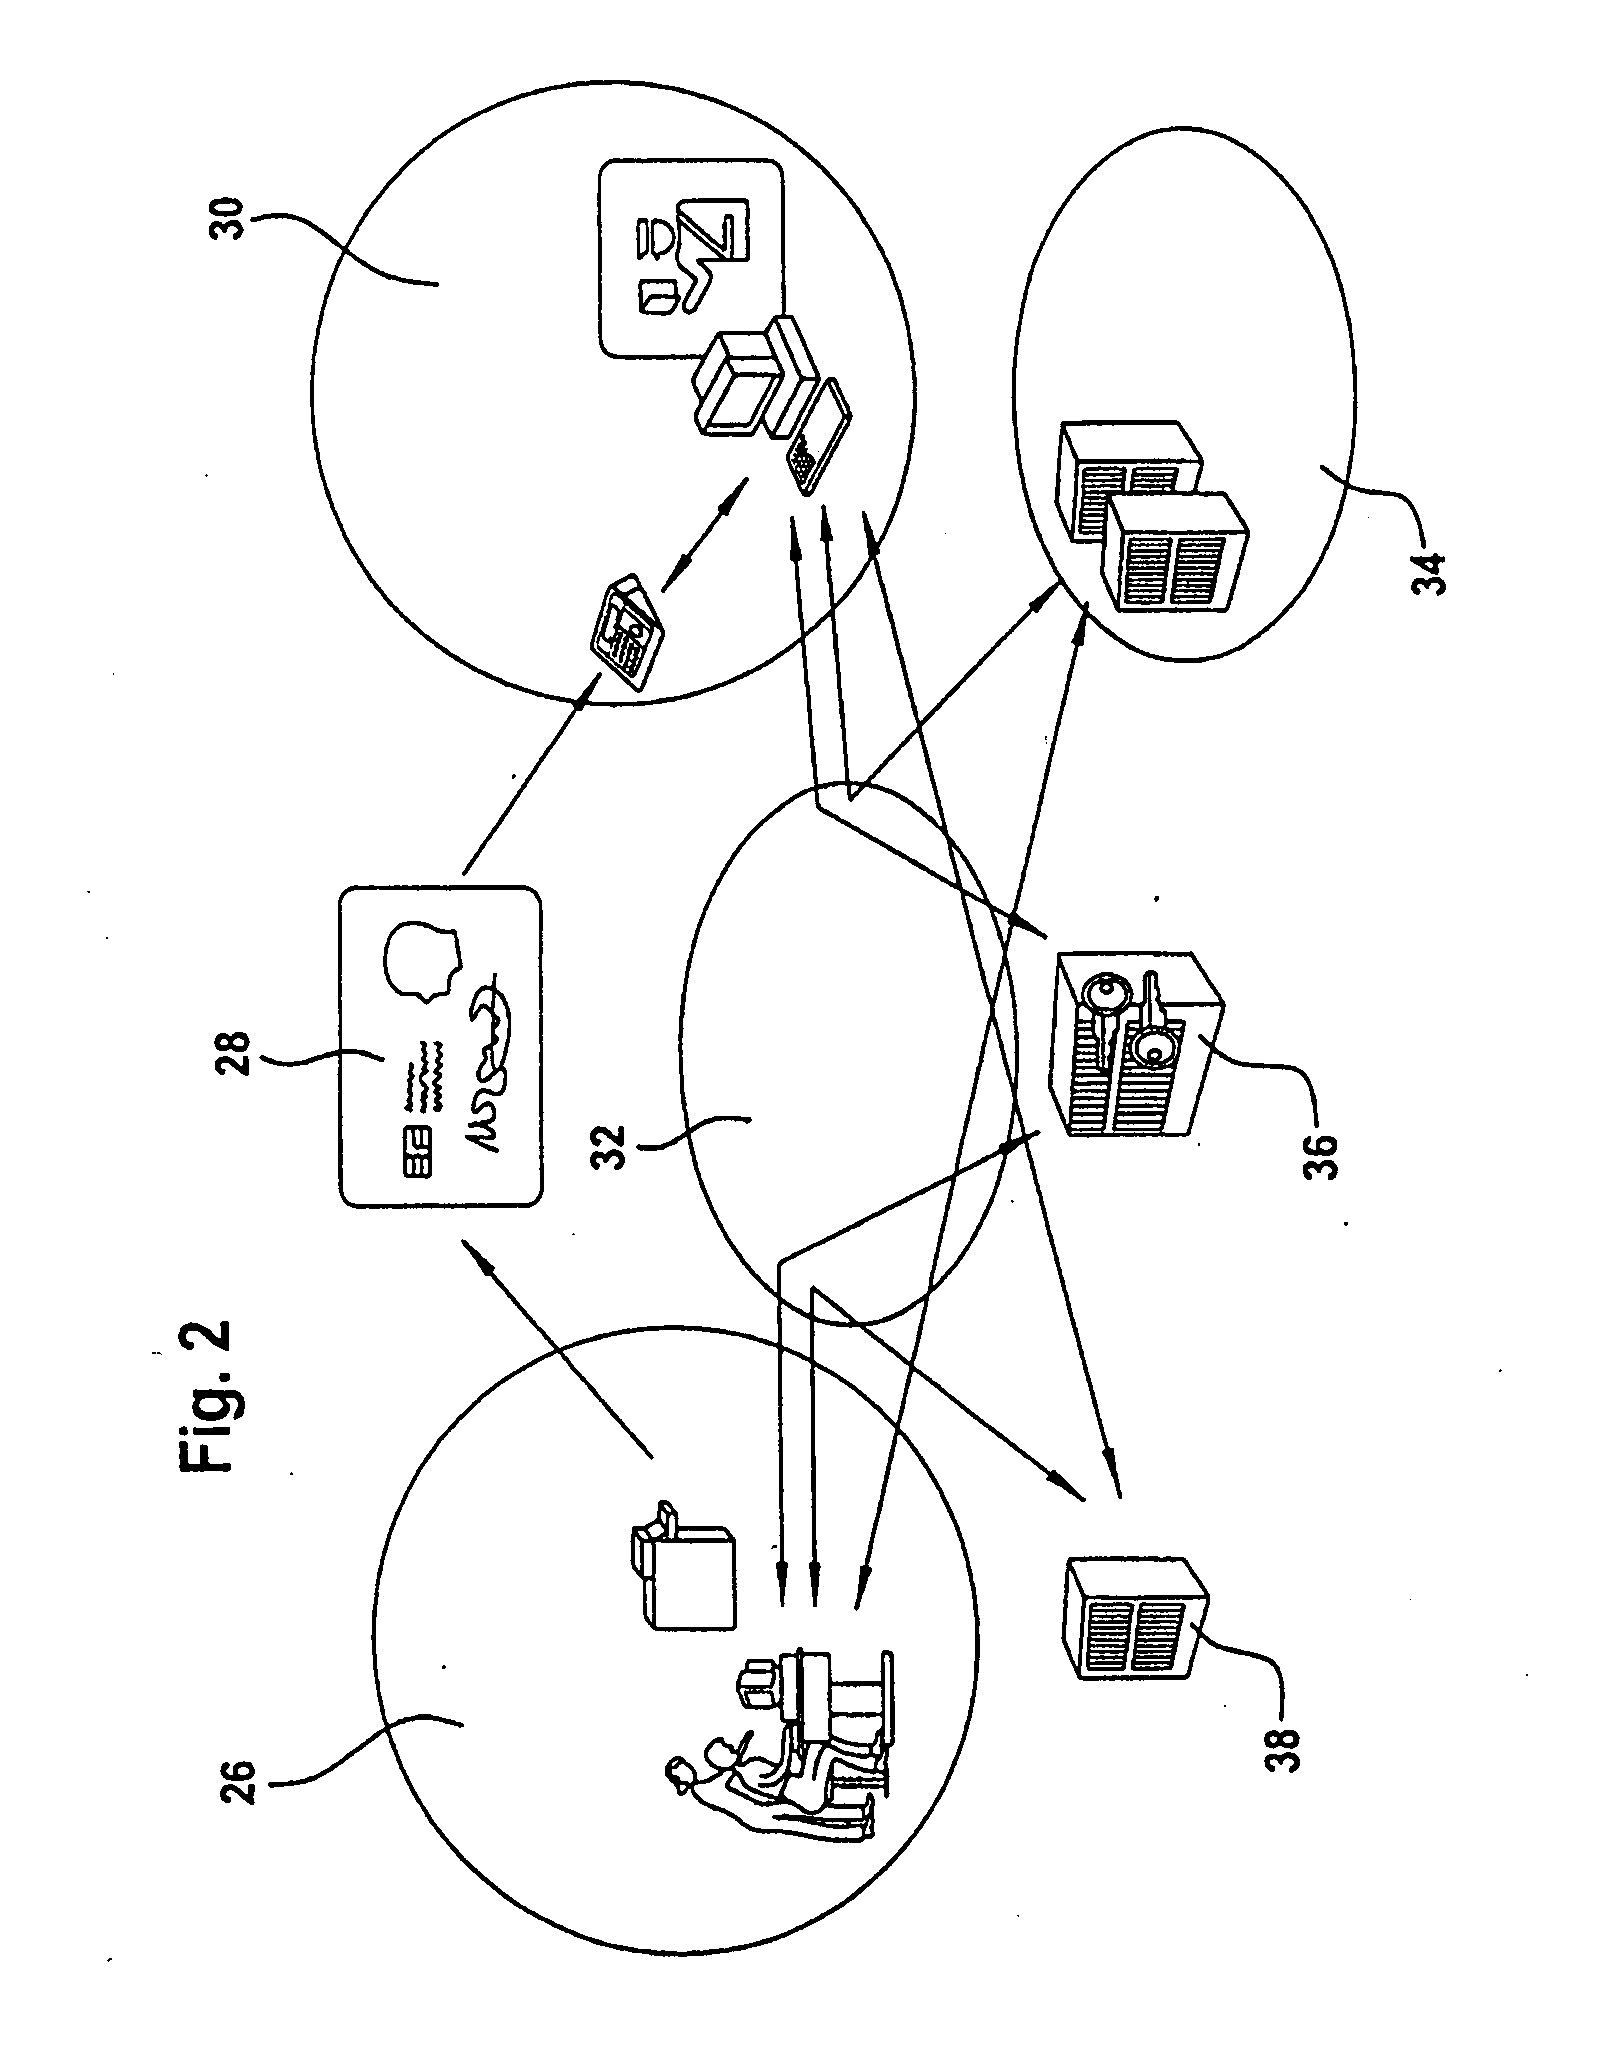 System and method for automated border-crossing checks